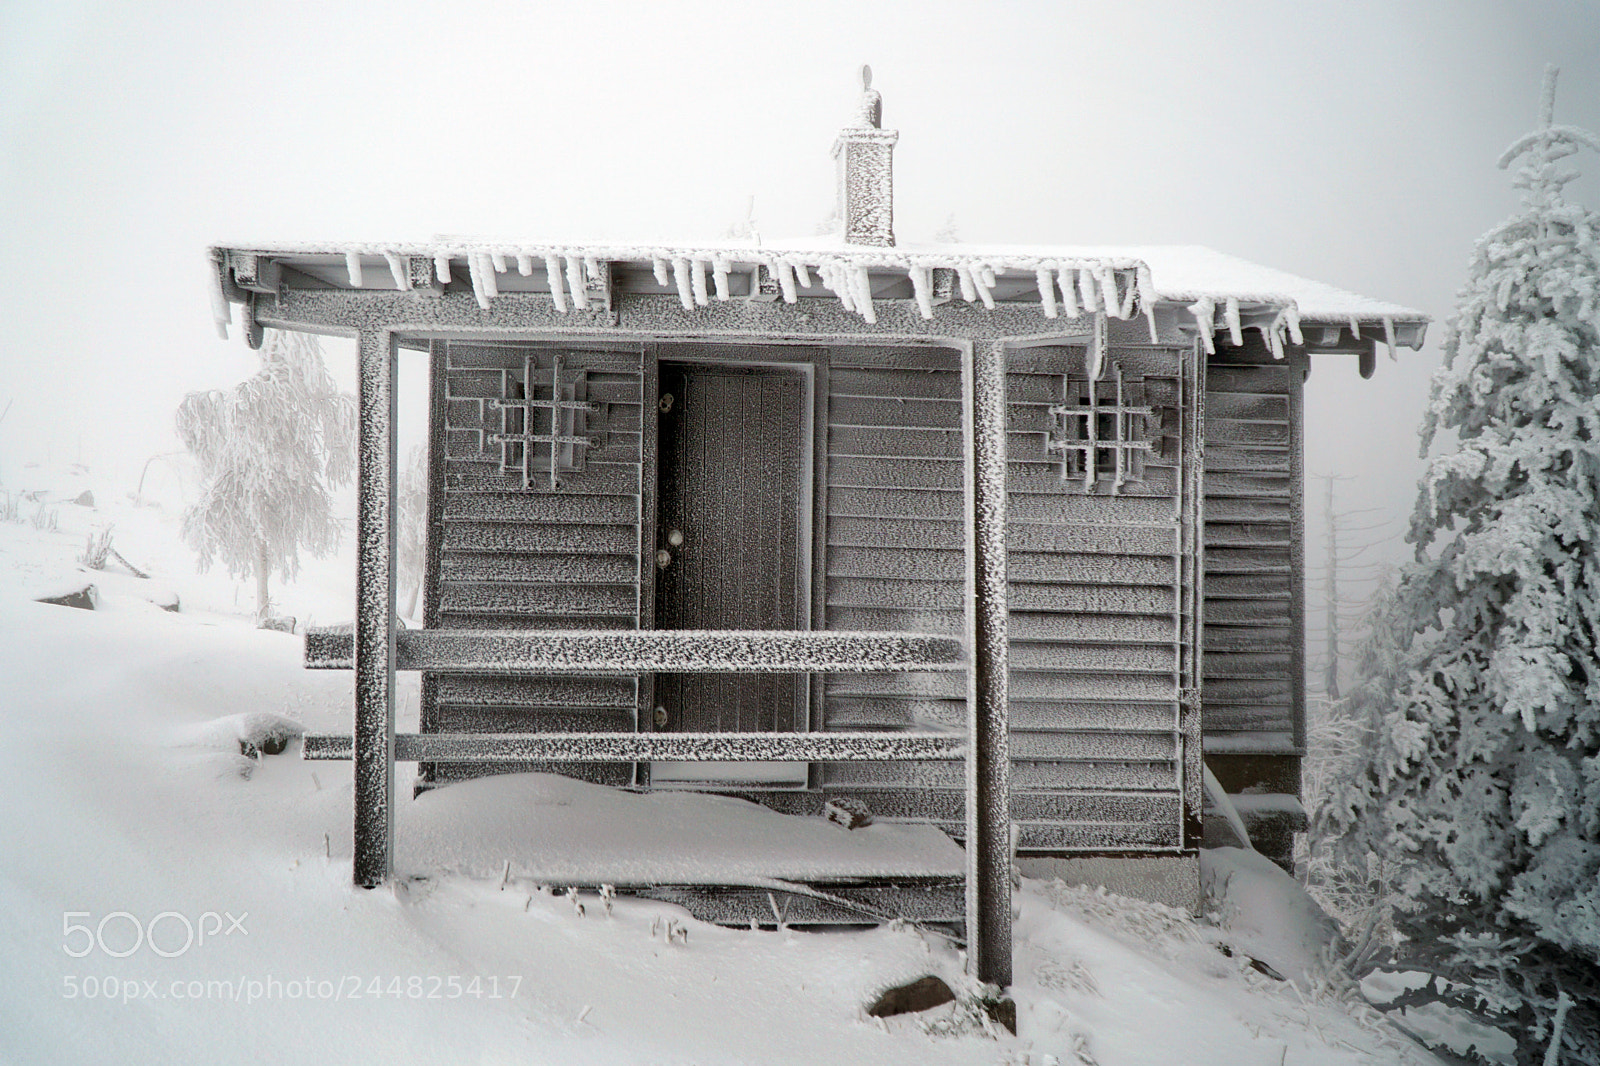 Sony a6000 sample photo. Hut on hornisgrinde photography